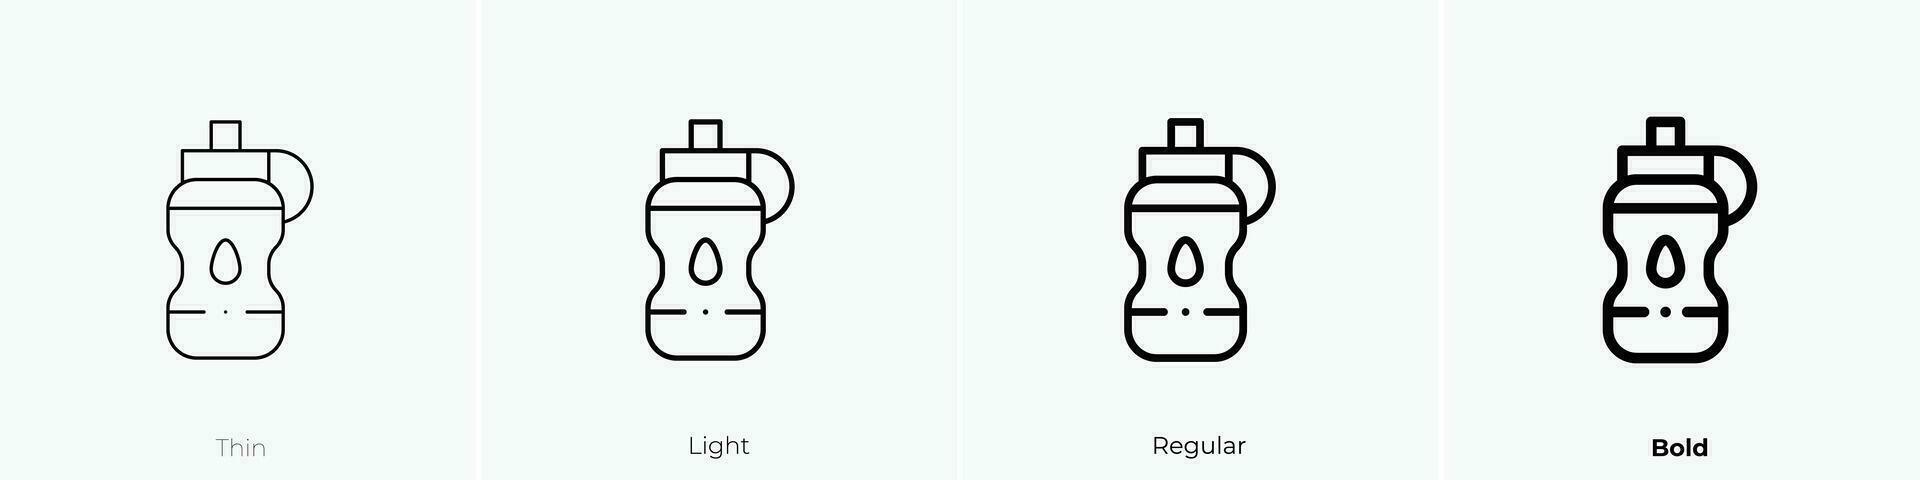 water bottle icon. Thin, Light, Regular And Bold style design isolated on white background vector